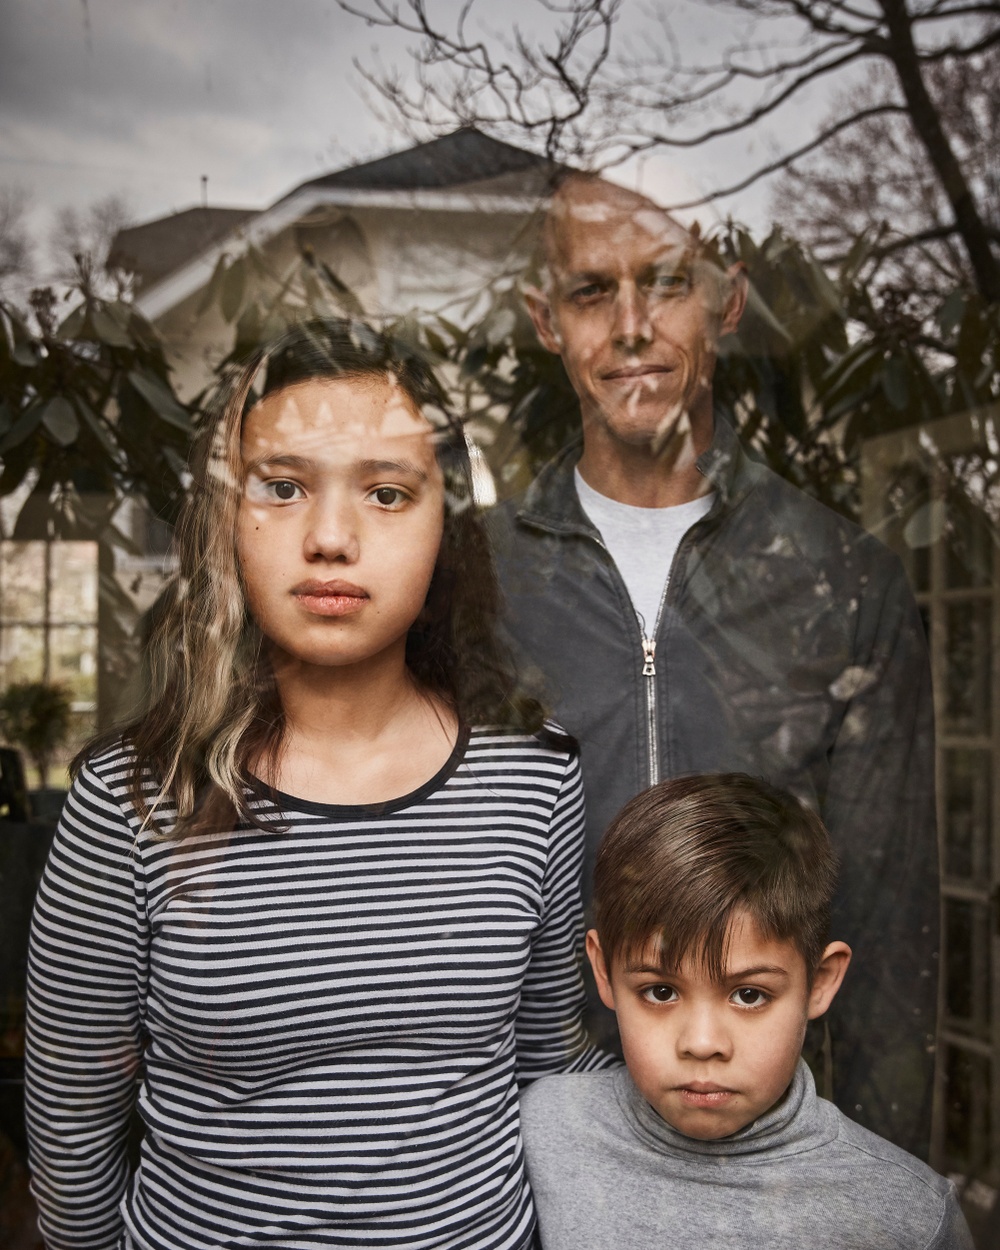 A photograph of two tanned children, one female and one male, with an older man standing behind them looking out a window with a reflection of a house and tree on it.